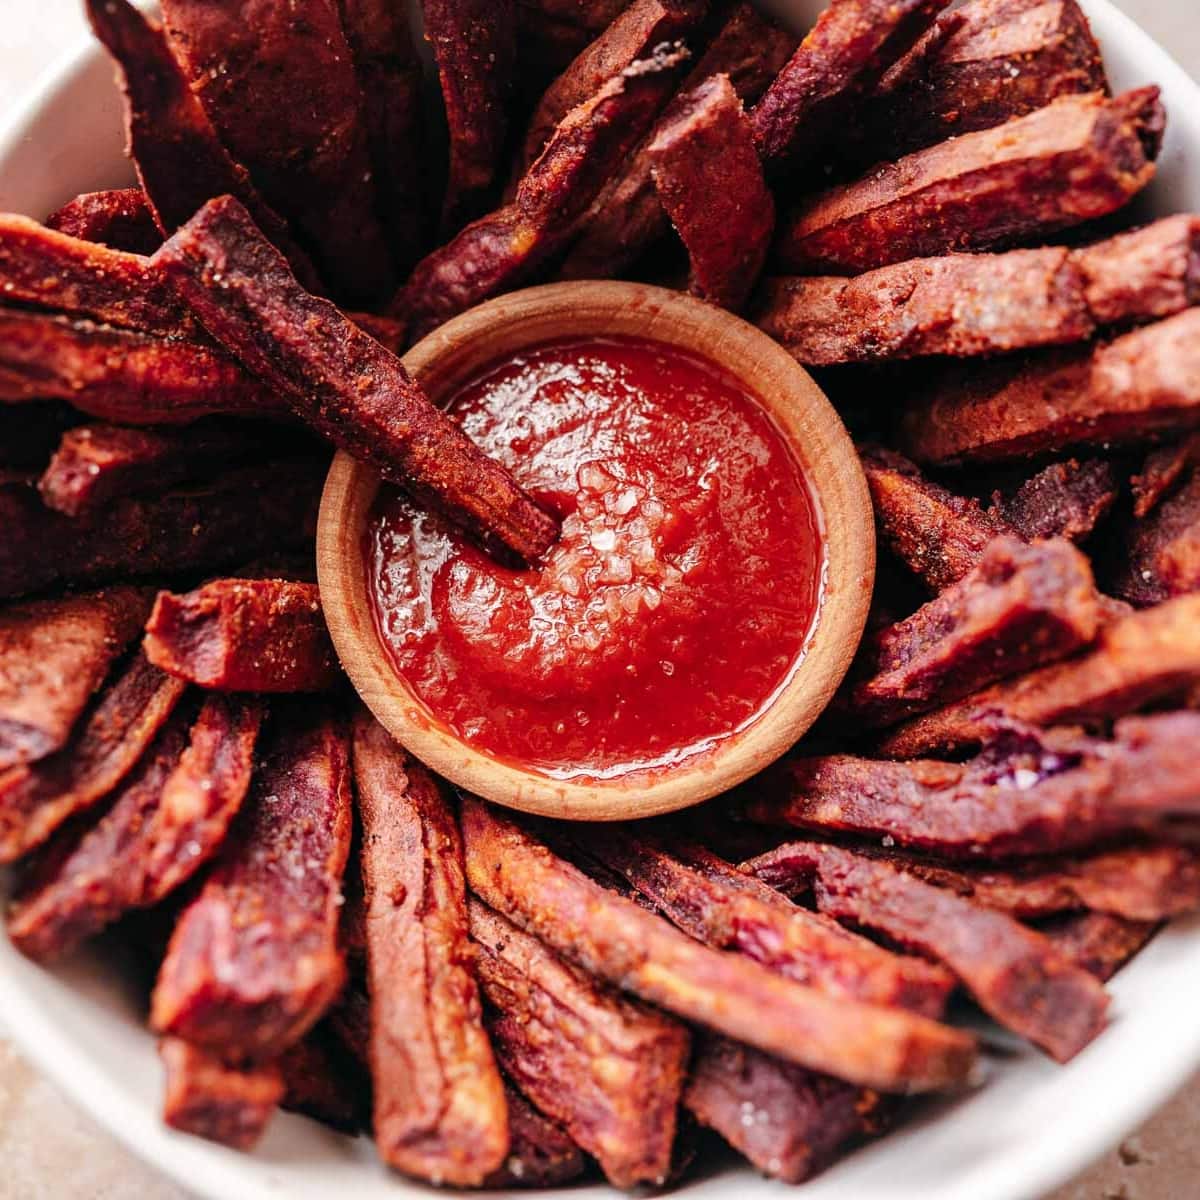 A close shot of a bowl of purple fries surrounding a small bowl of ketchup.